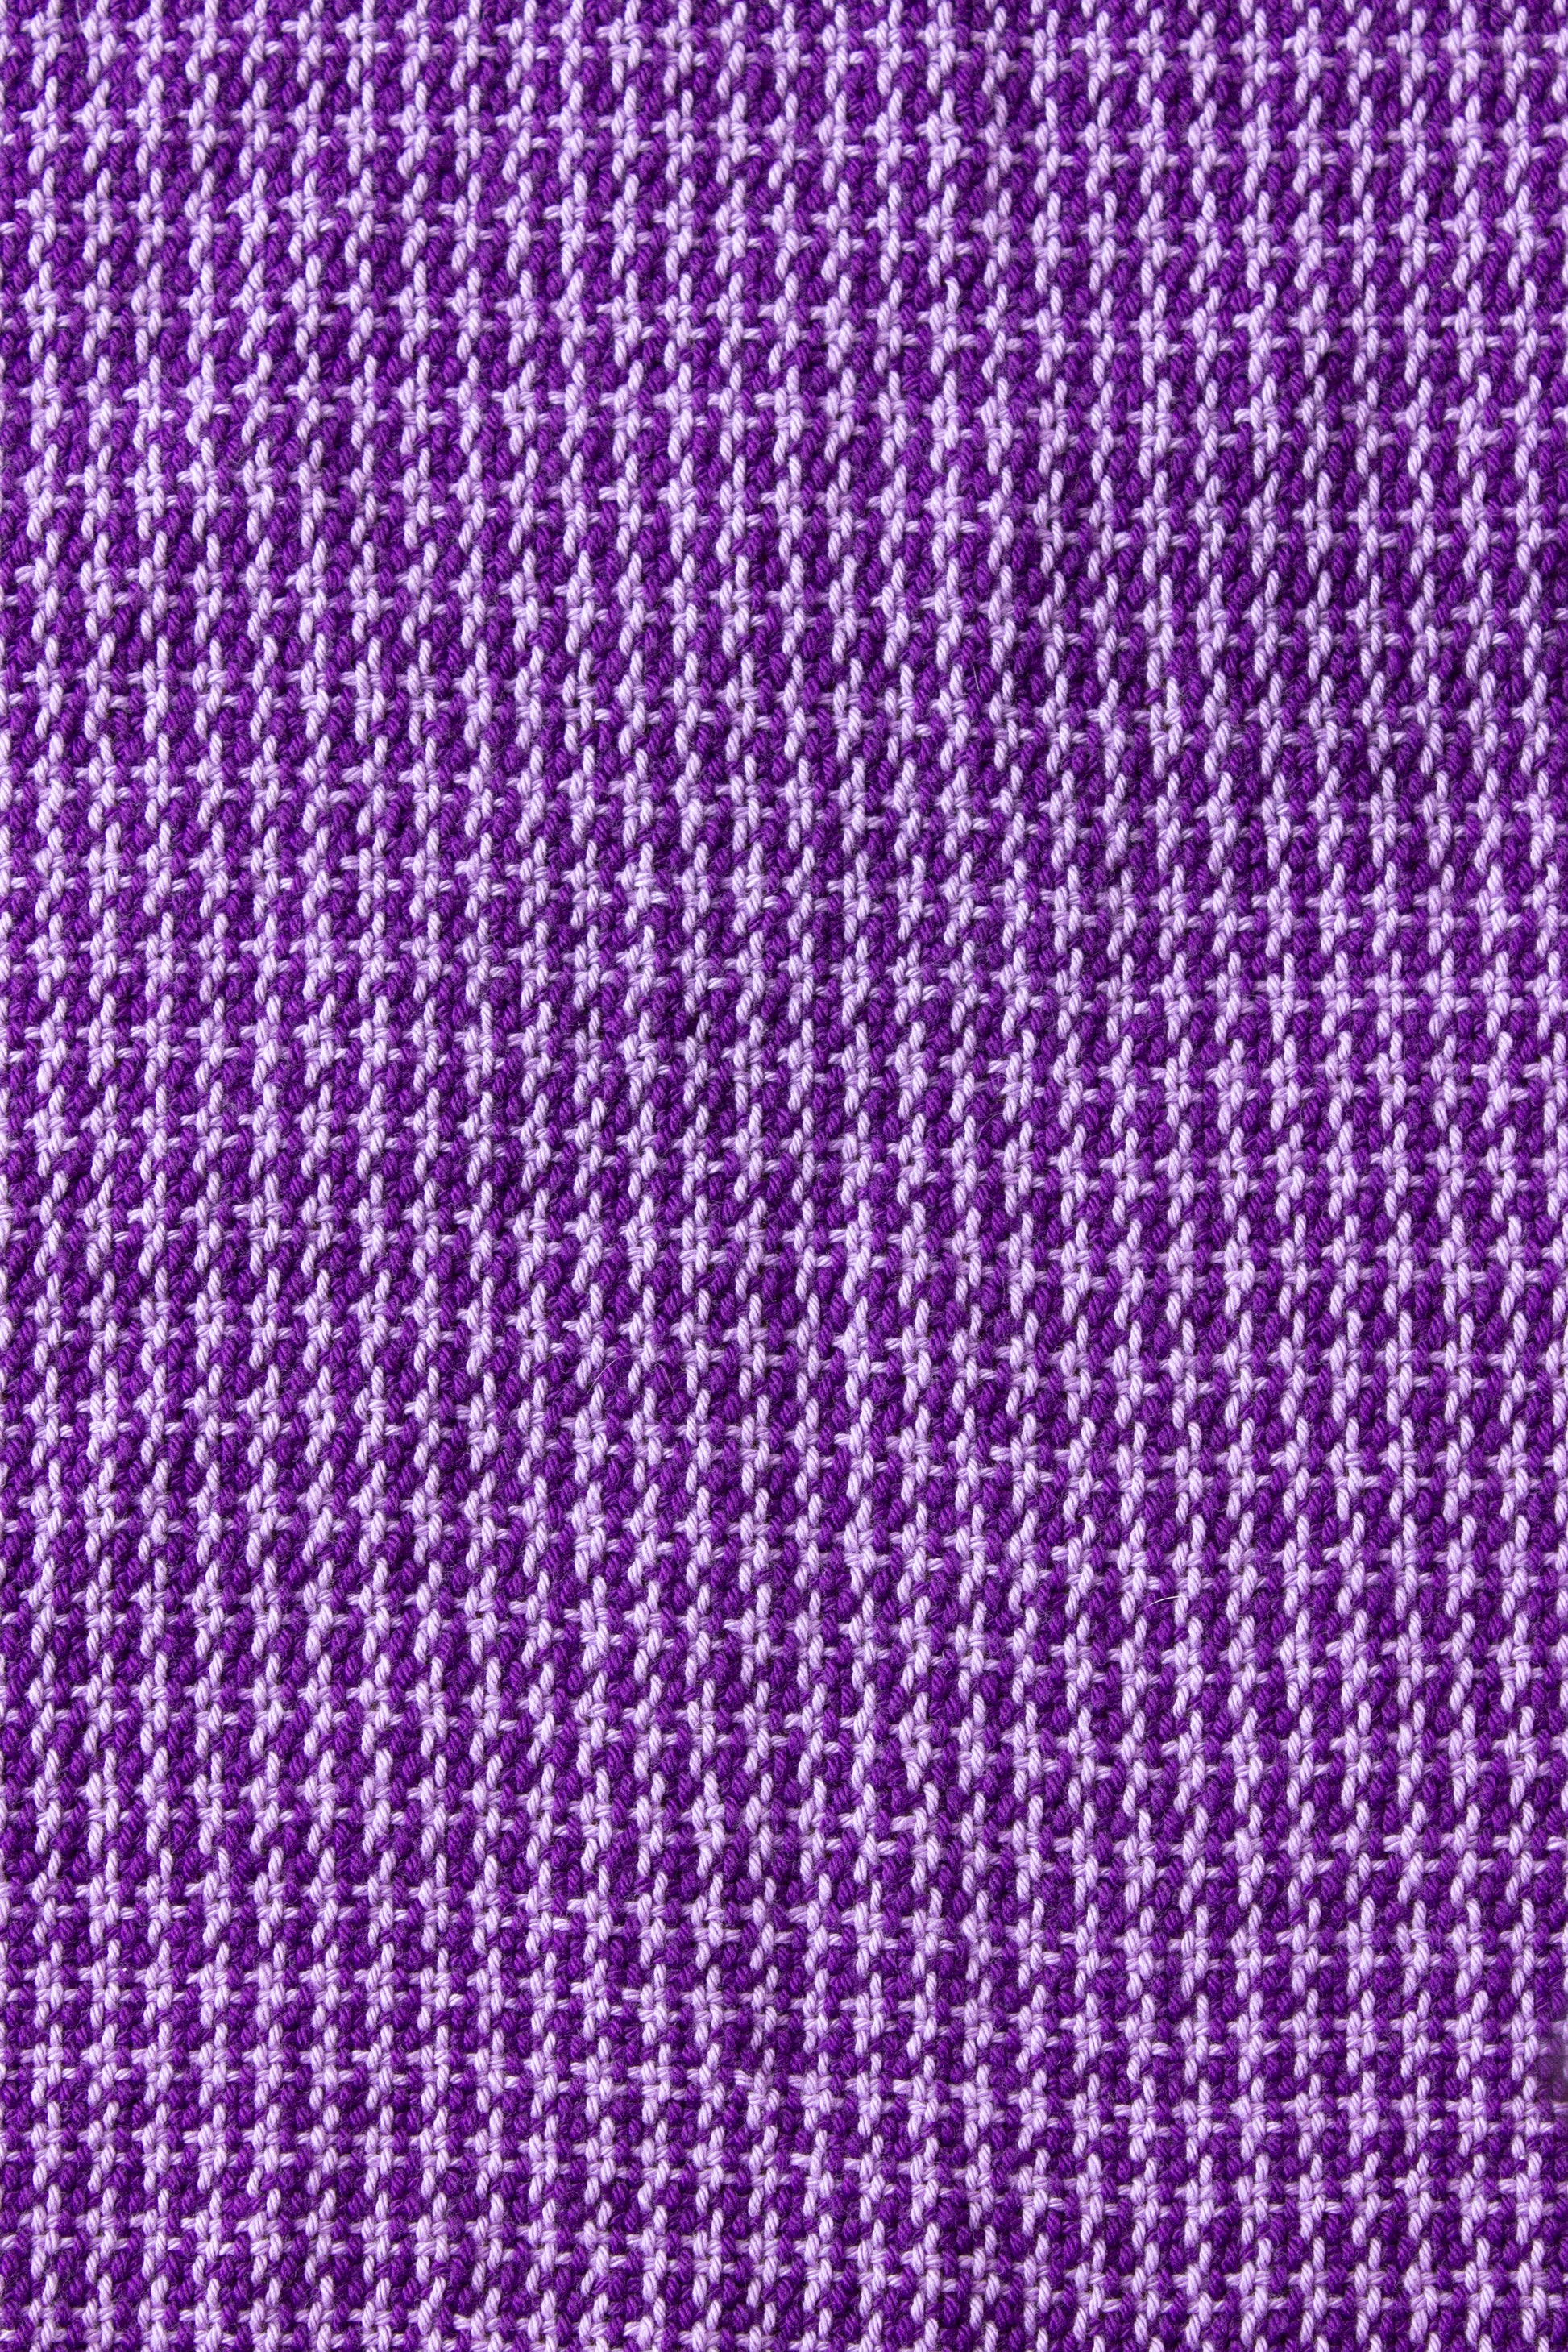 Cotton dish towel, purple houndstooth pattern, light purple, dark purple, handmade, natural fibres, locally sourced yarn, hemstitched, hemmed, hand sewn hem, washer and dryer safe, woven in Canada